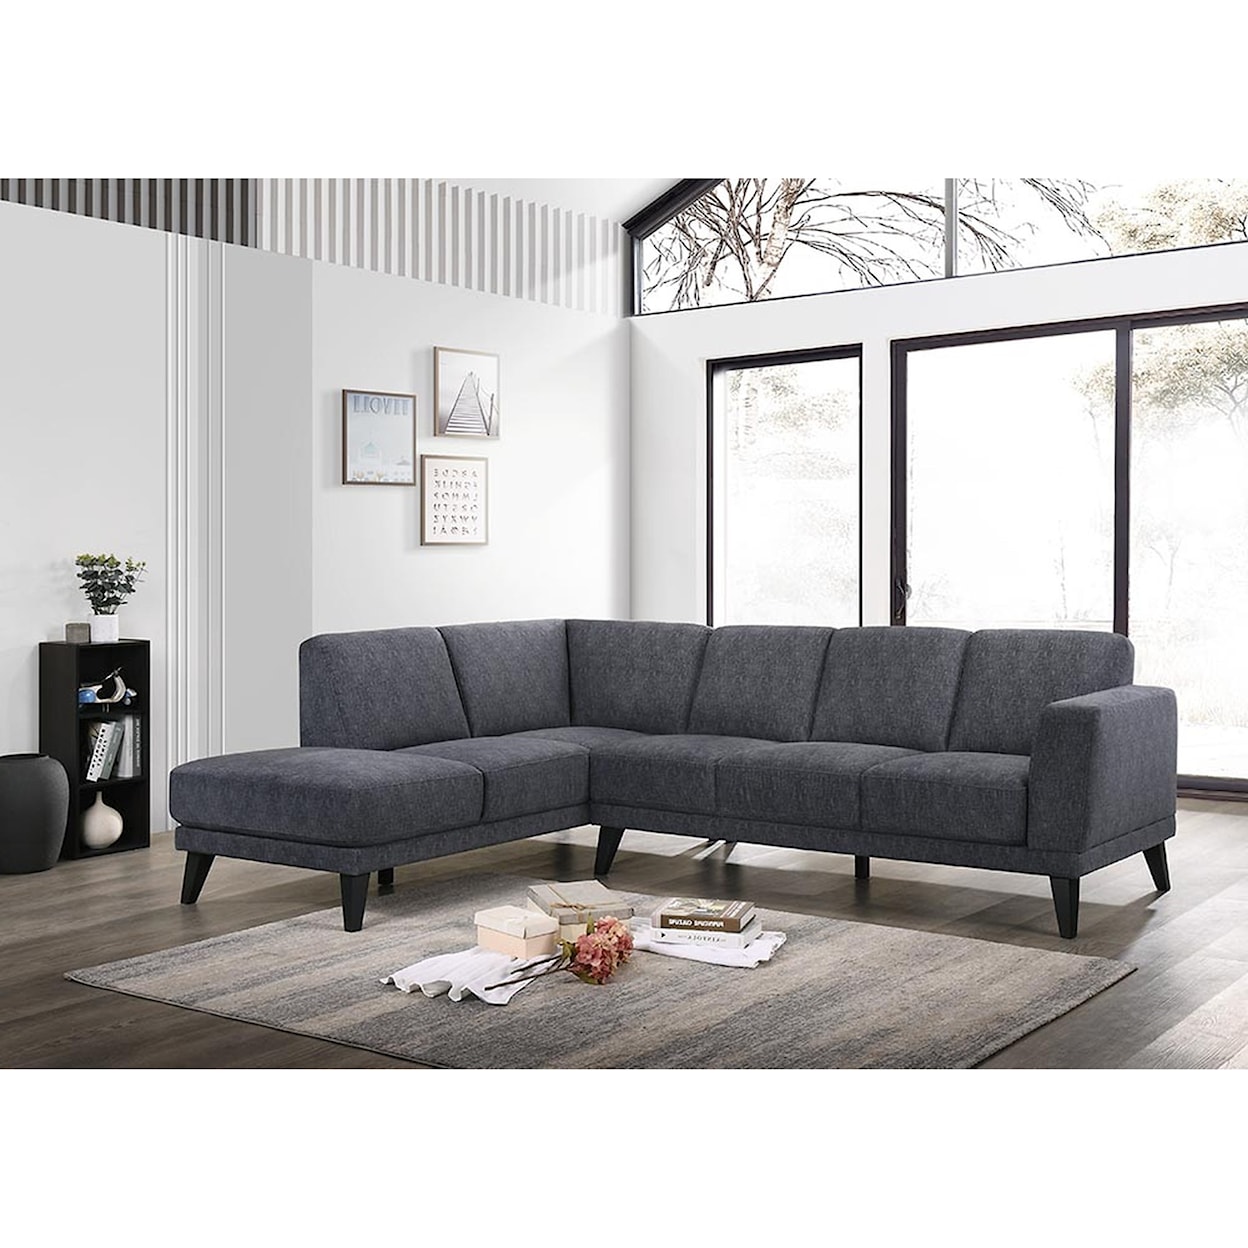 New Classic Altamura 5-Seat Sectional w/ LAF Chaise